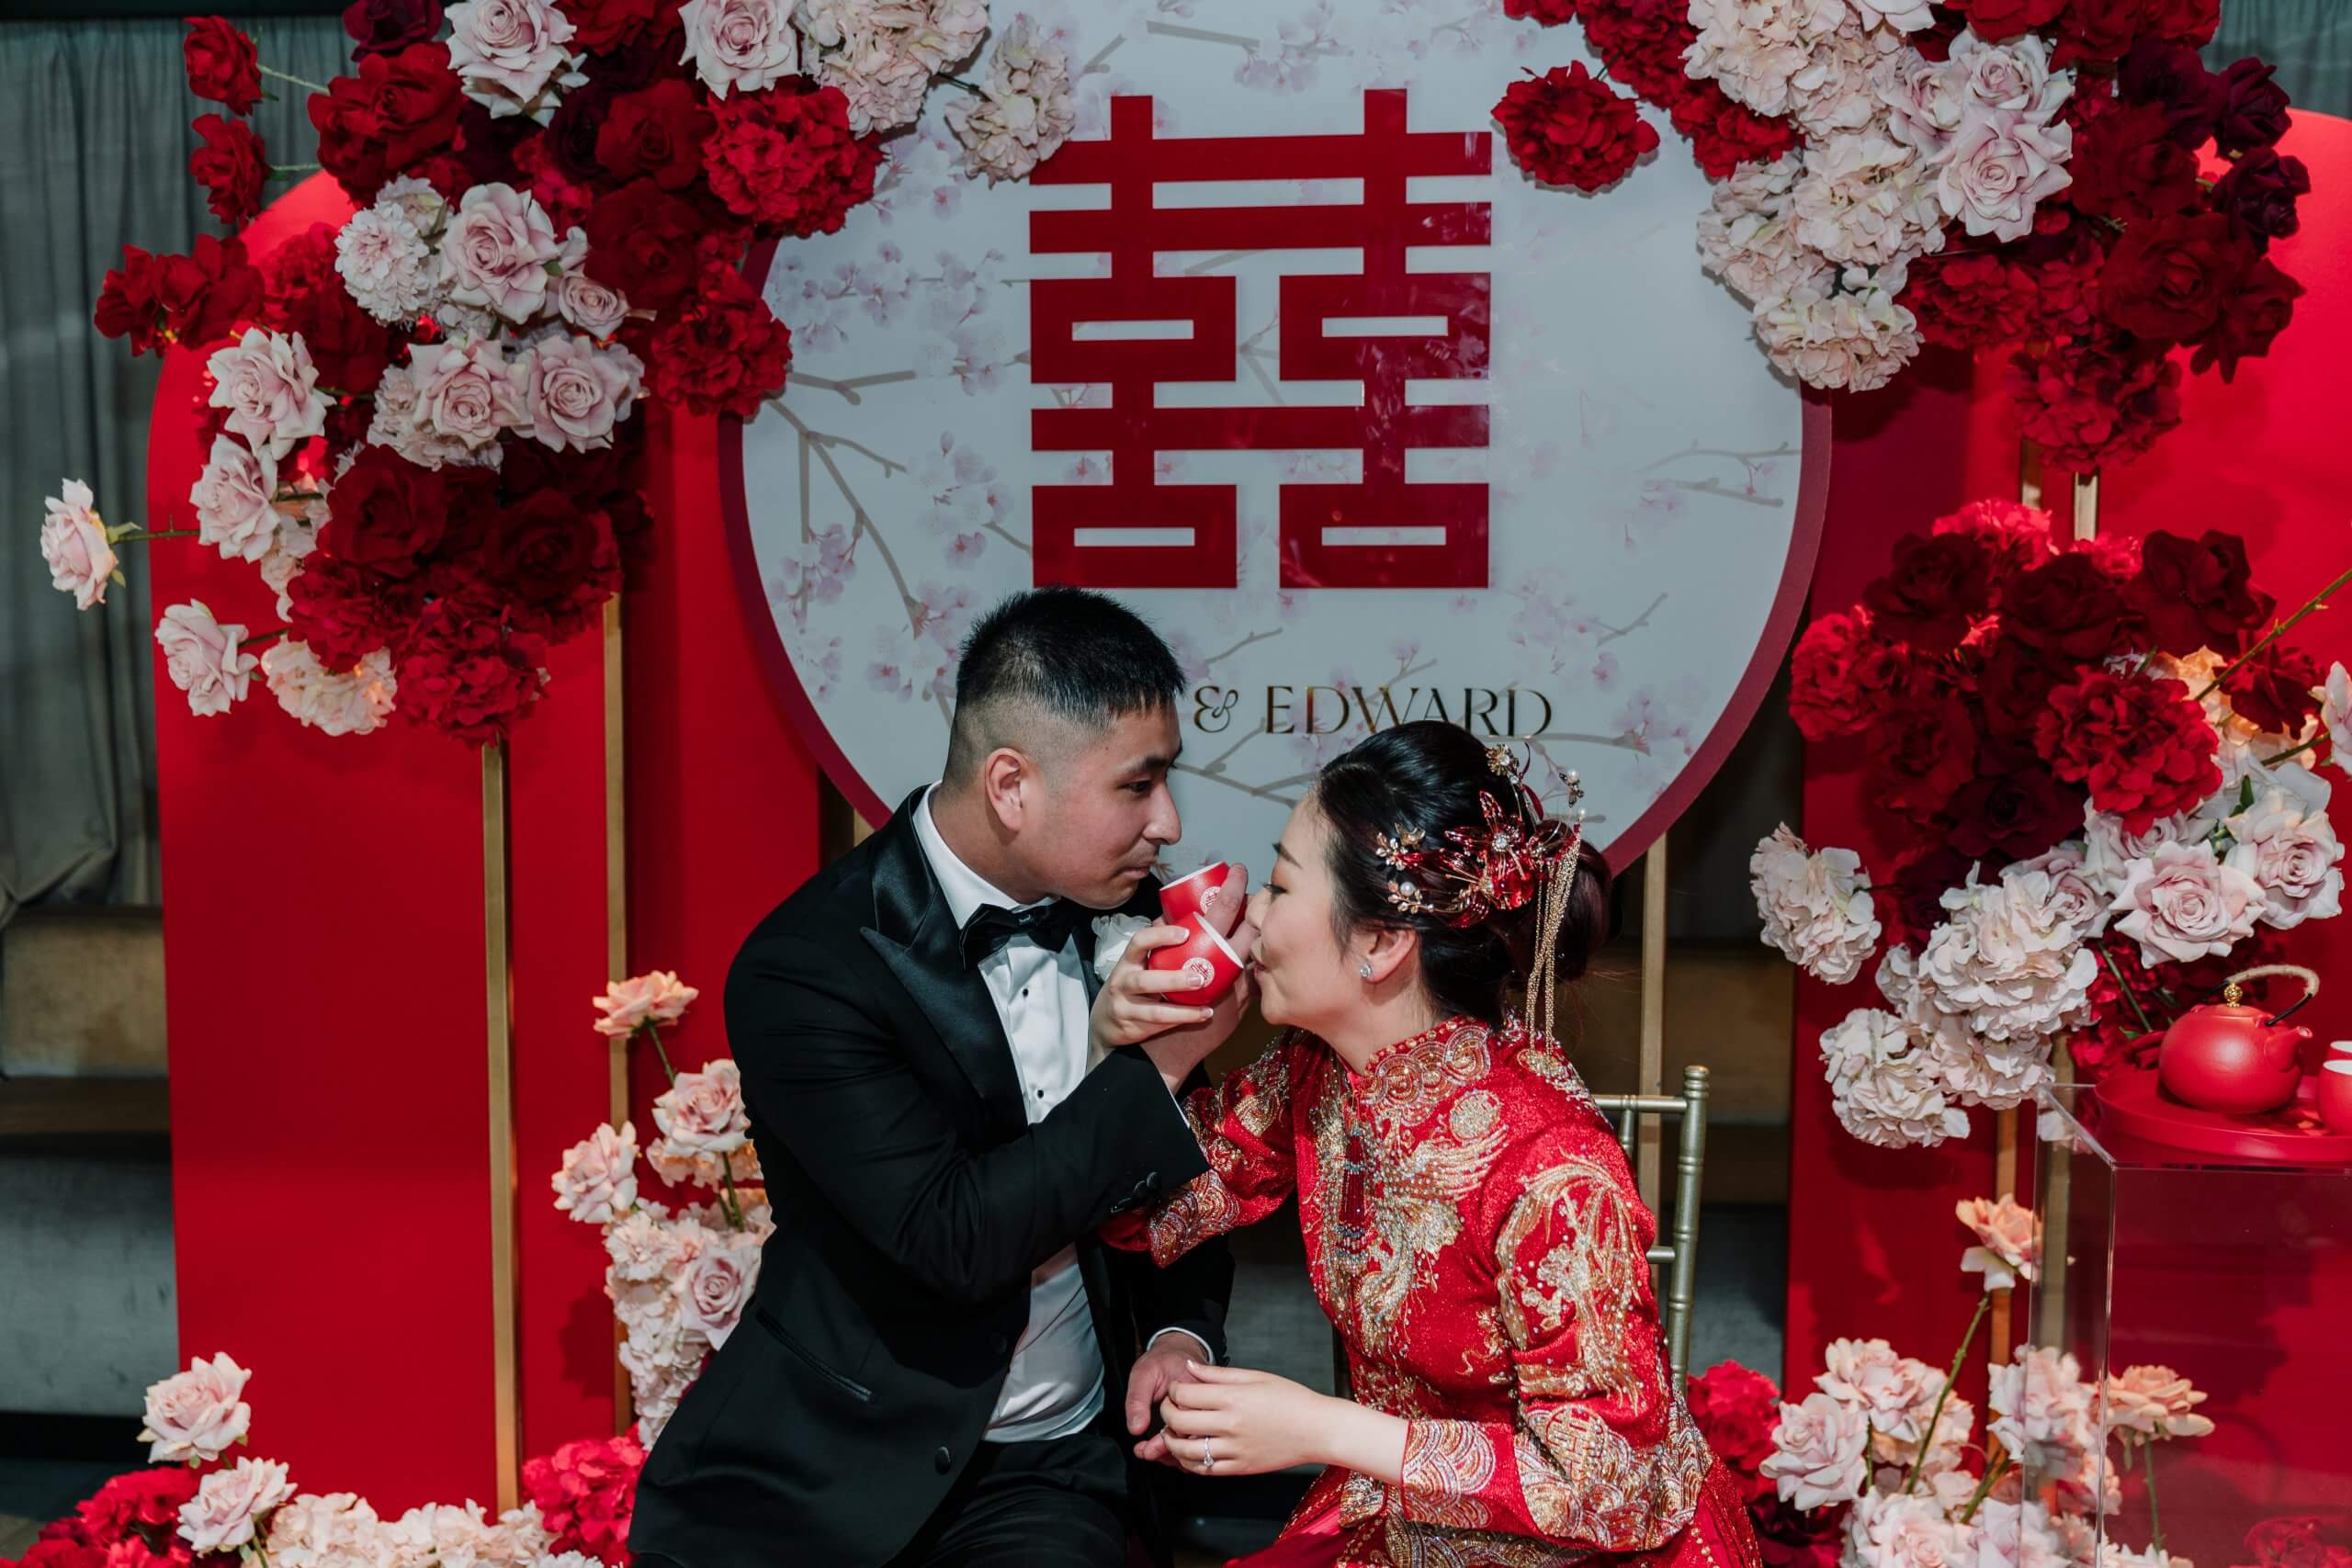 Customise Your Wedding - During their tea ceremony, surrounded by pretty red and pink flowers, the bride (wearing a red traditional Chinese dress) and the groom (black and white tux) drink tea in a toast.